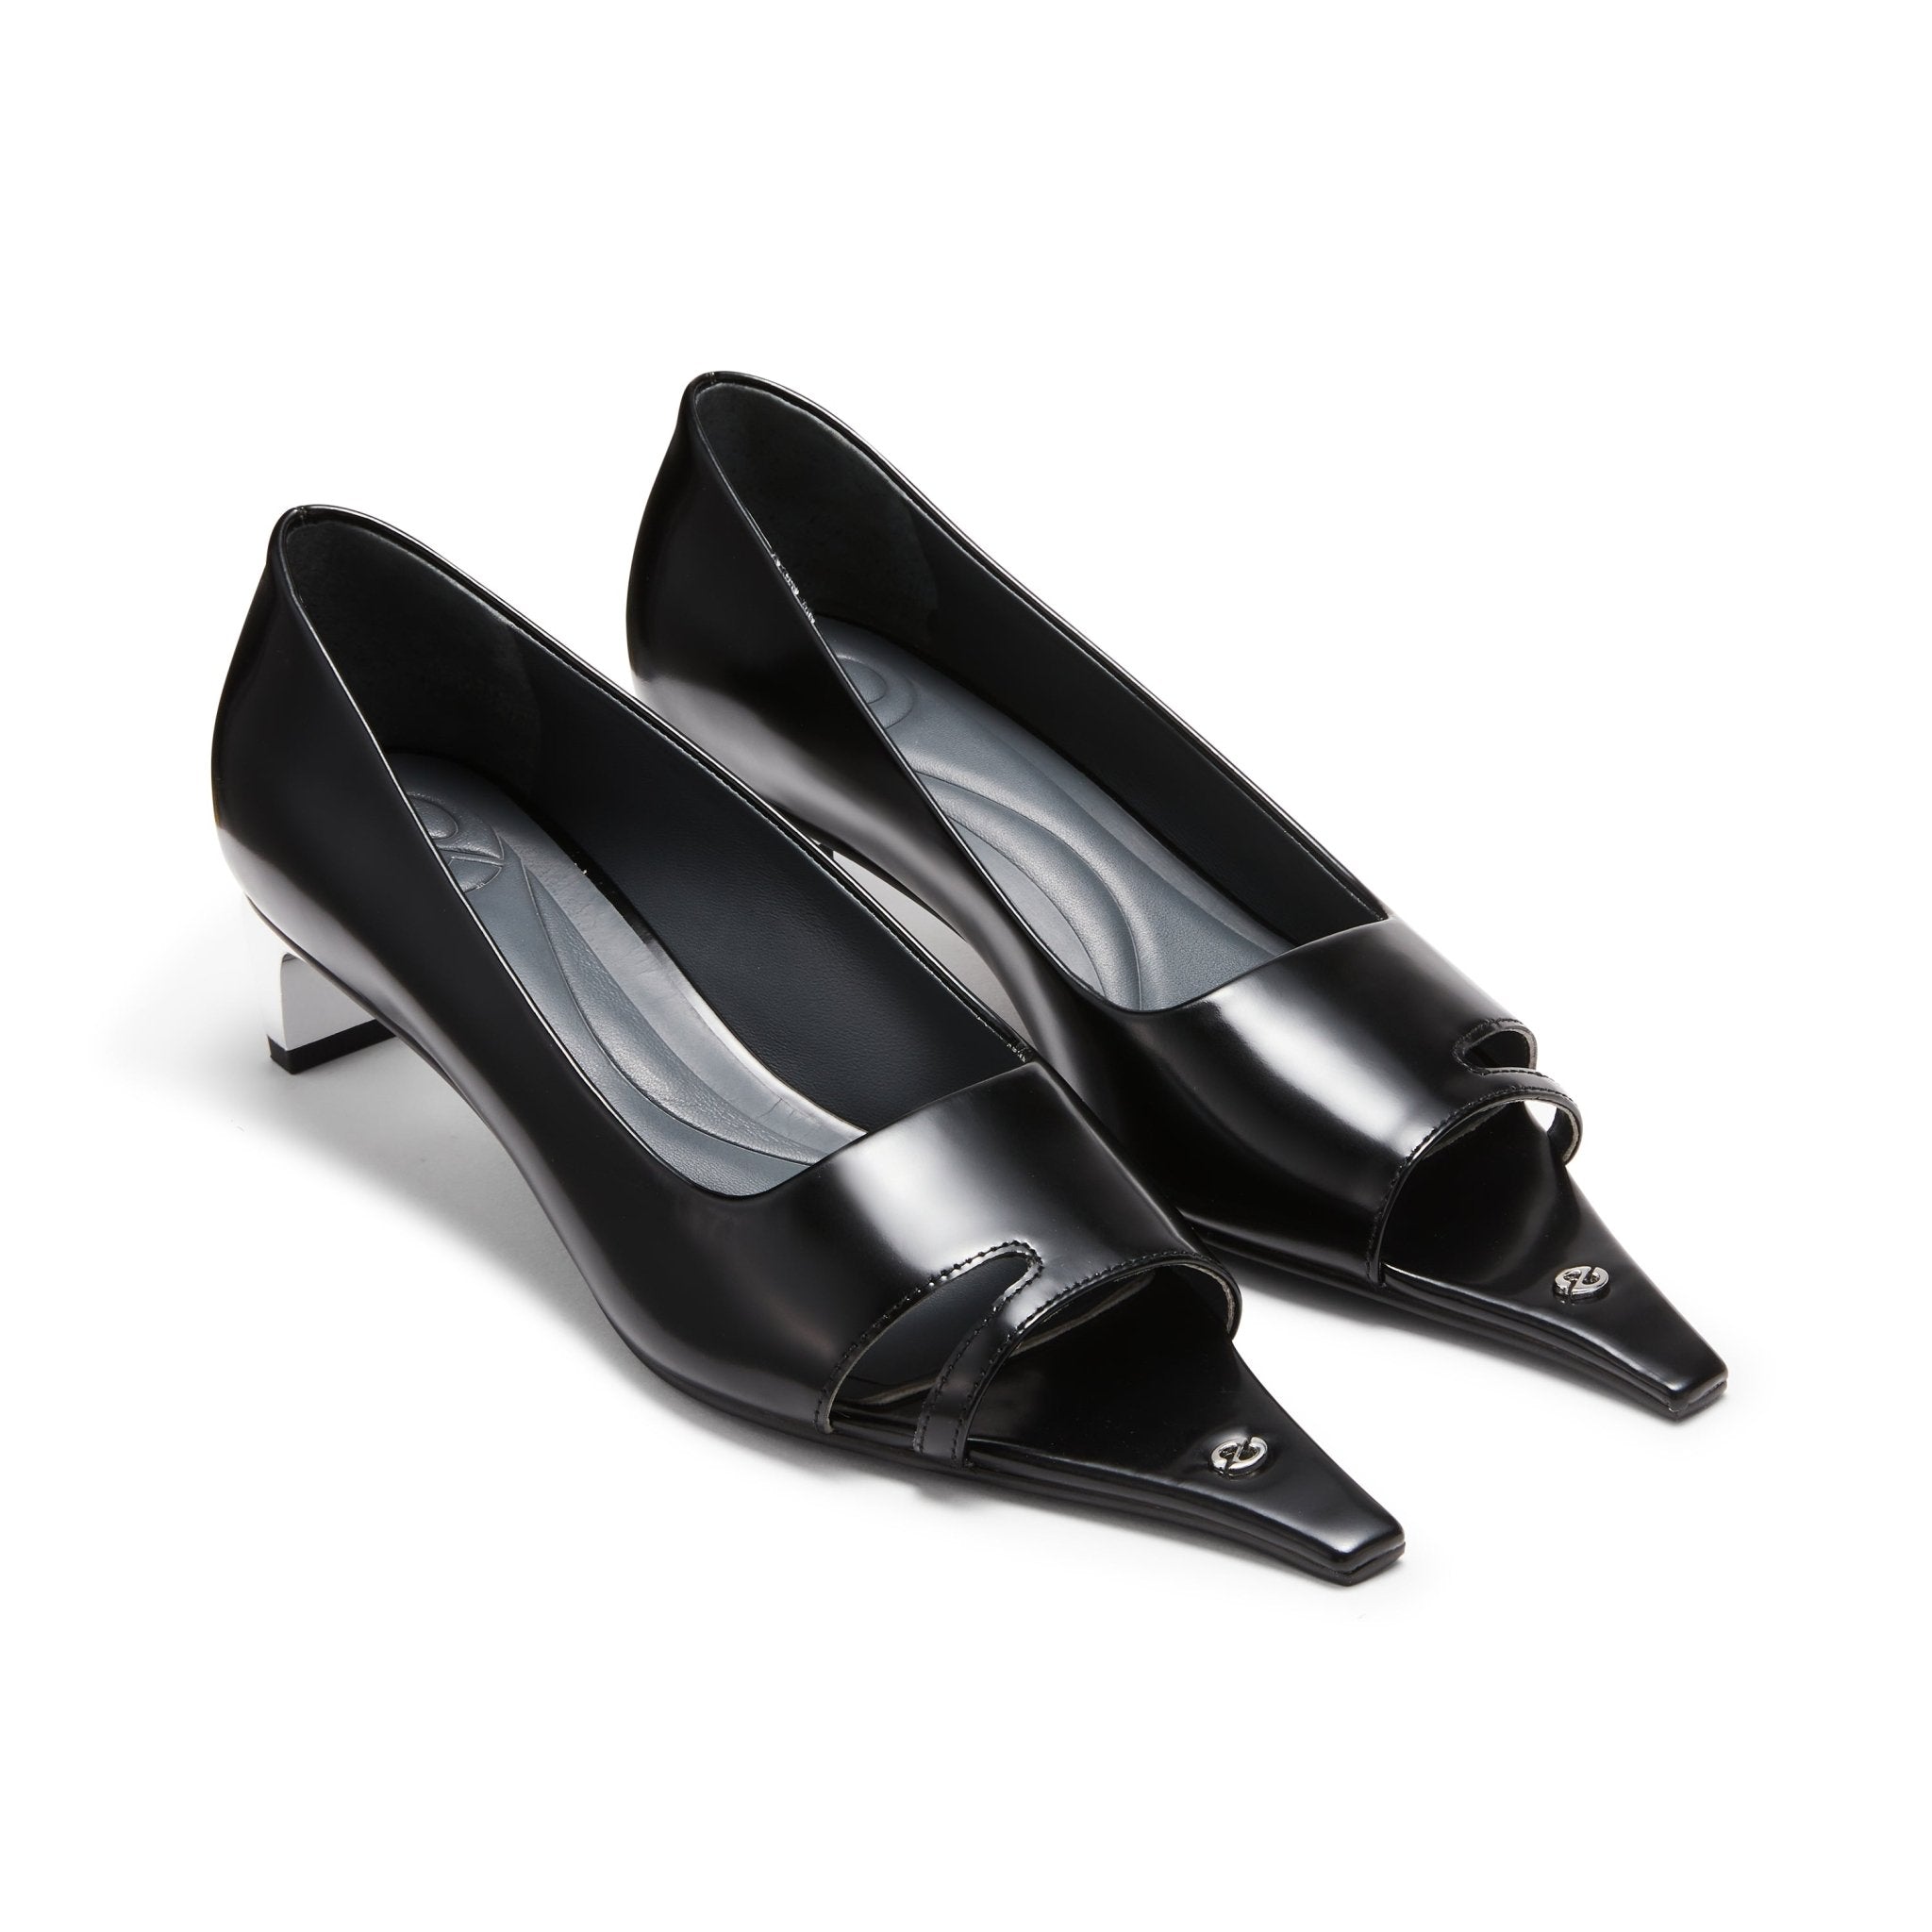 LOST IN ECHO Pointed Toe Hollow Heel Shoes in Black | MADA IN CHINA